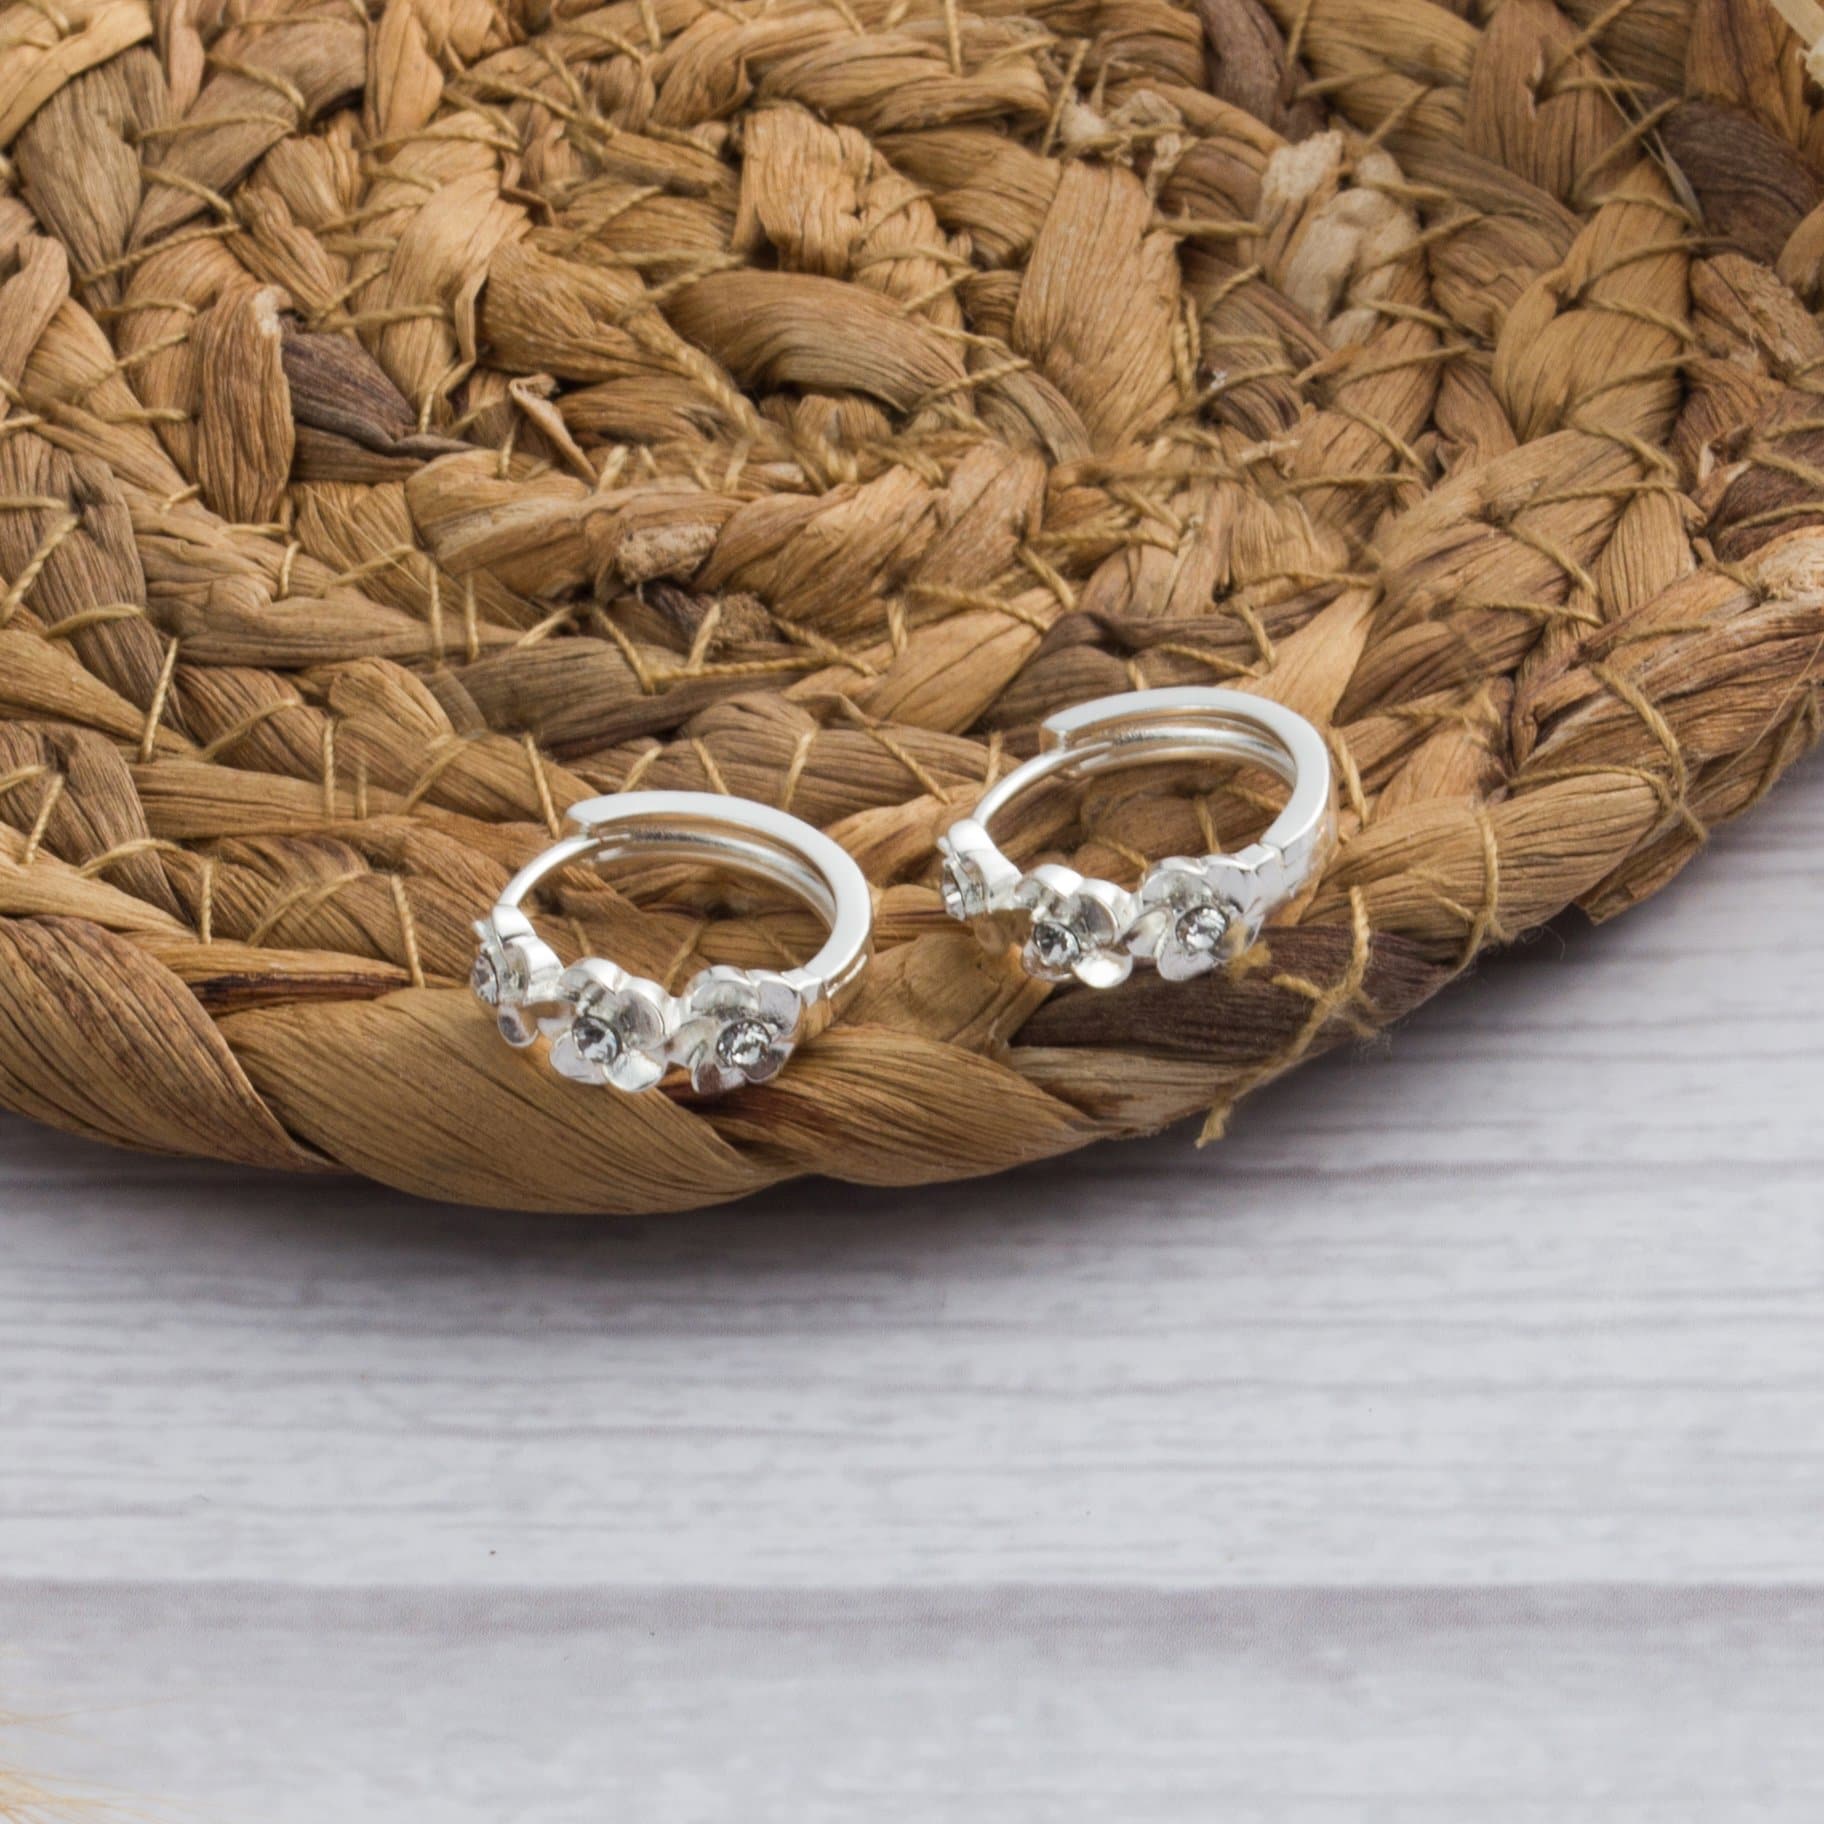 Silver Plated Flower Hoop Earrings Created with Zircondia® Crystals